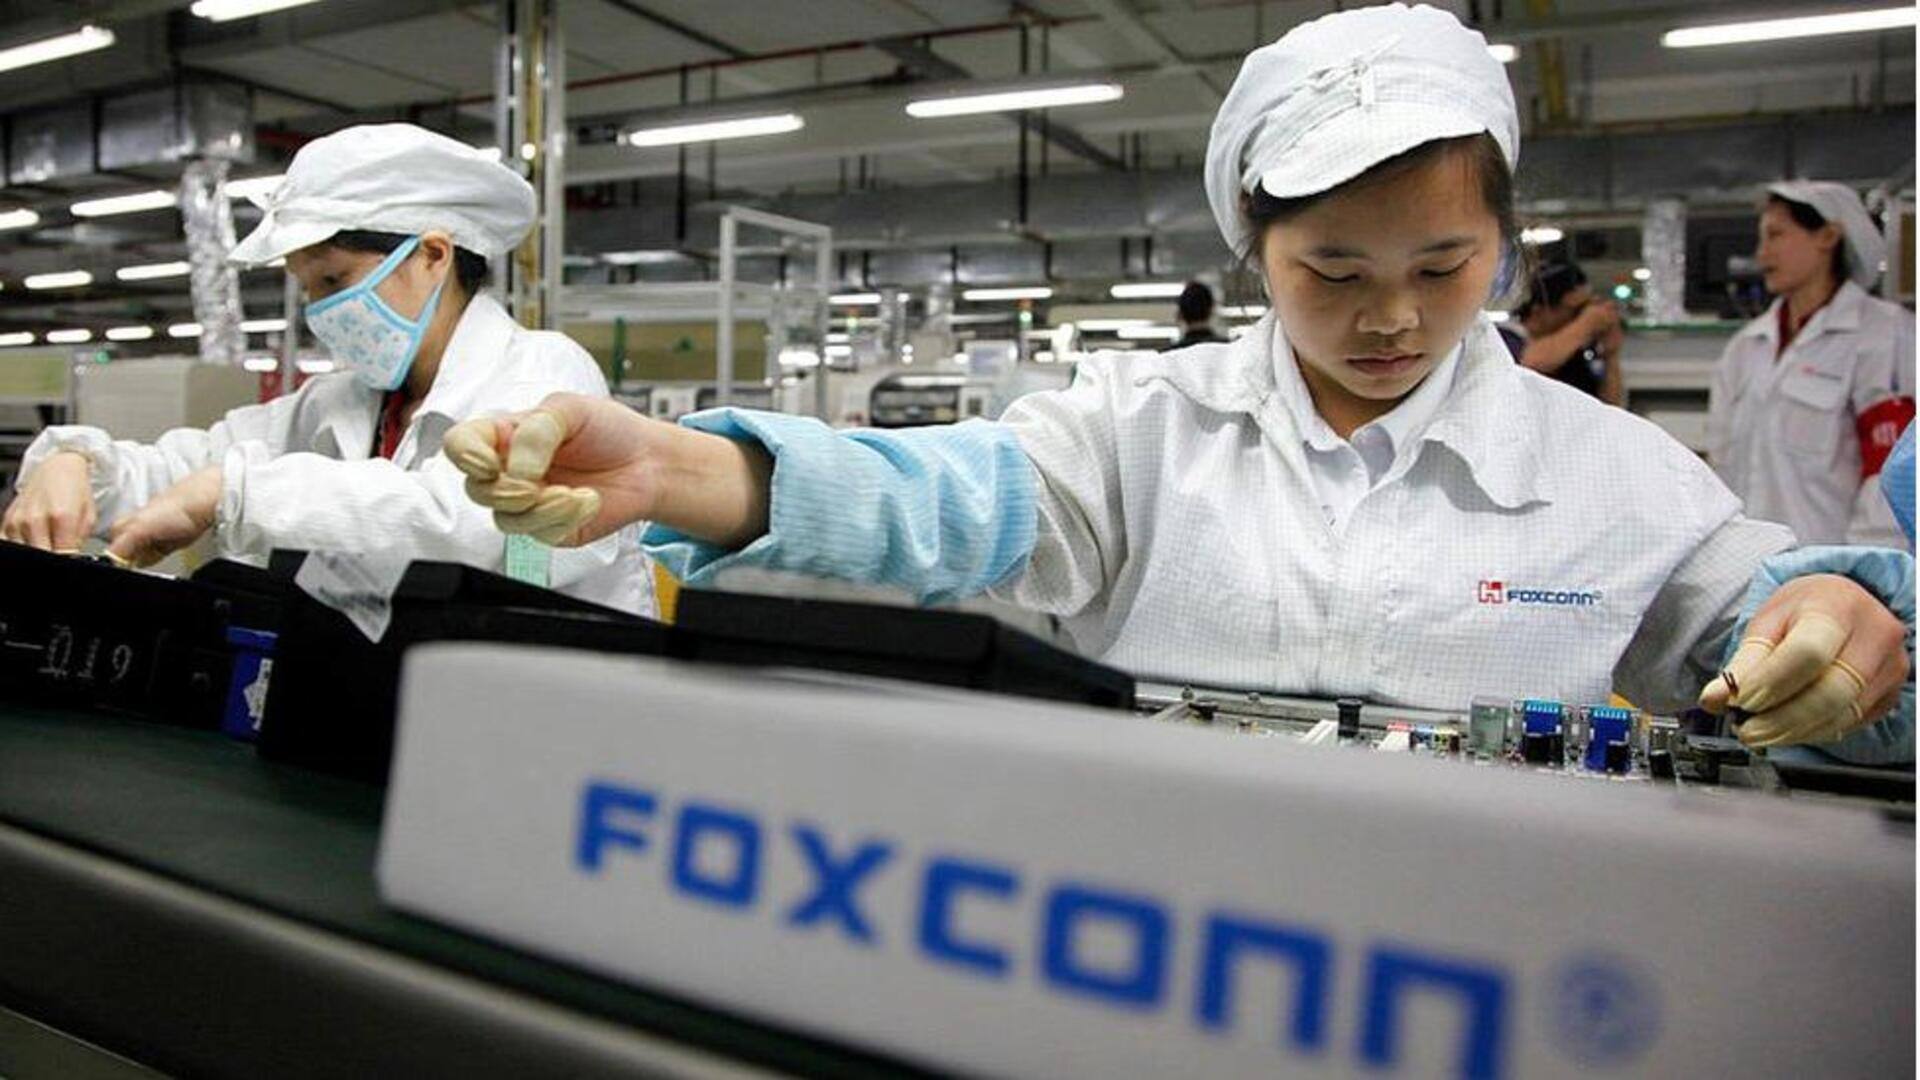 iPhone-maker Foxconn under investigation by Chinese authorities, stock plummets